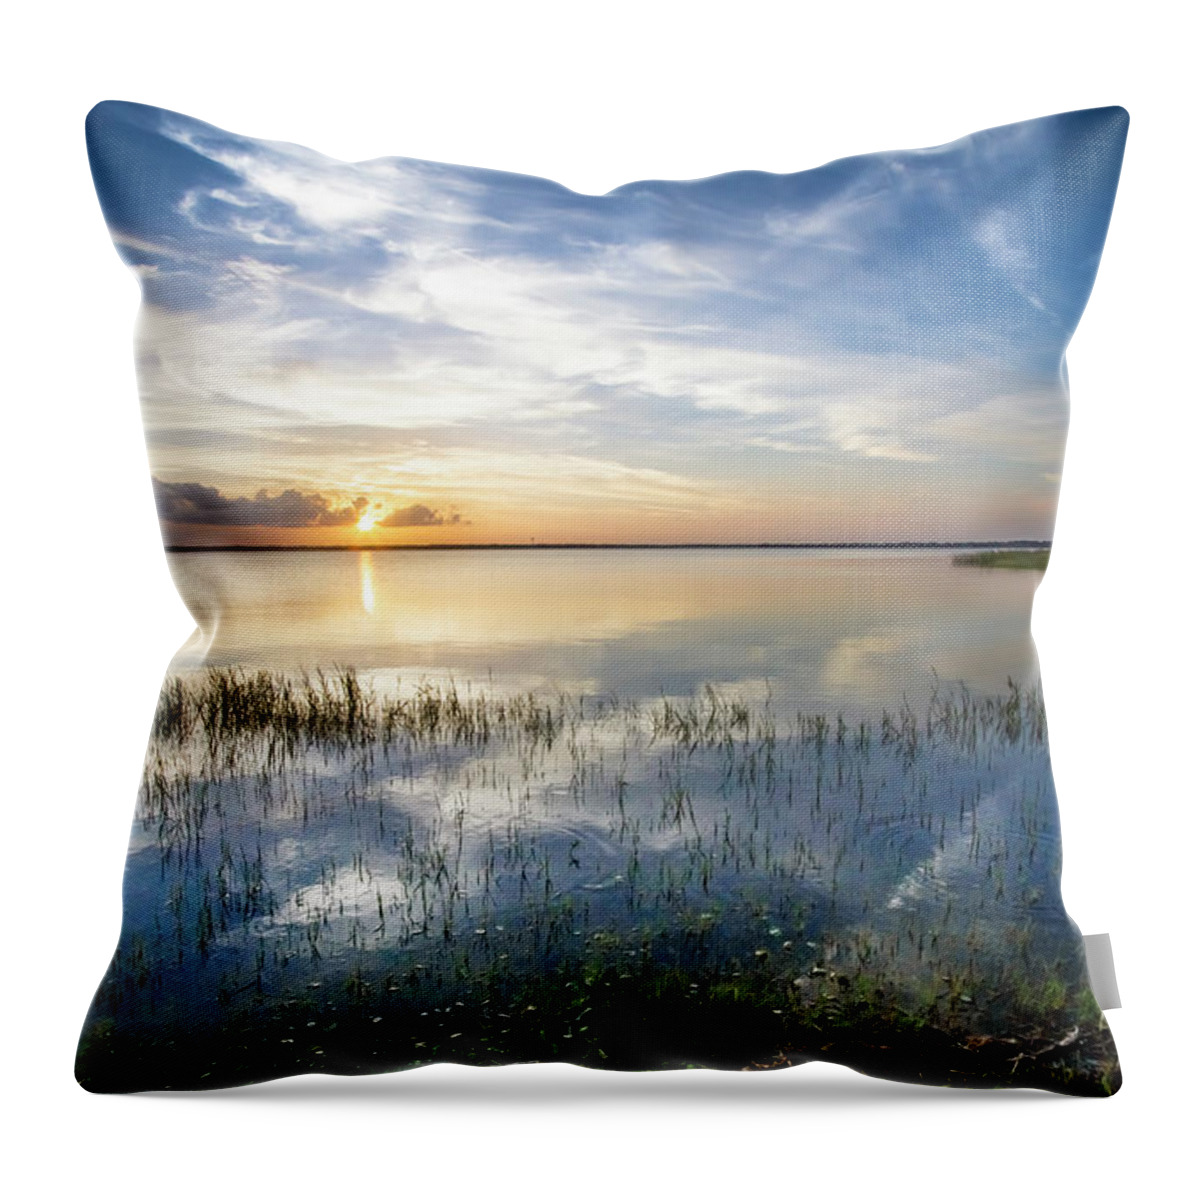 Boats Throw Pillow featuring the photograph Evening Clouds over the Lake by Debra and Dave Vanderlaan